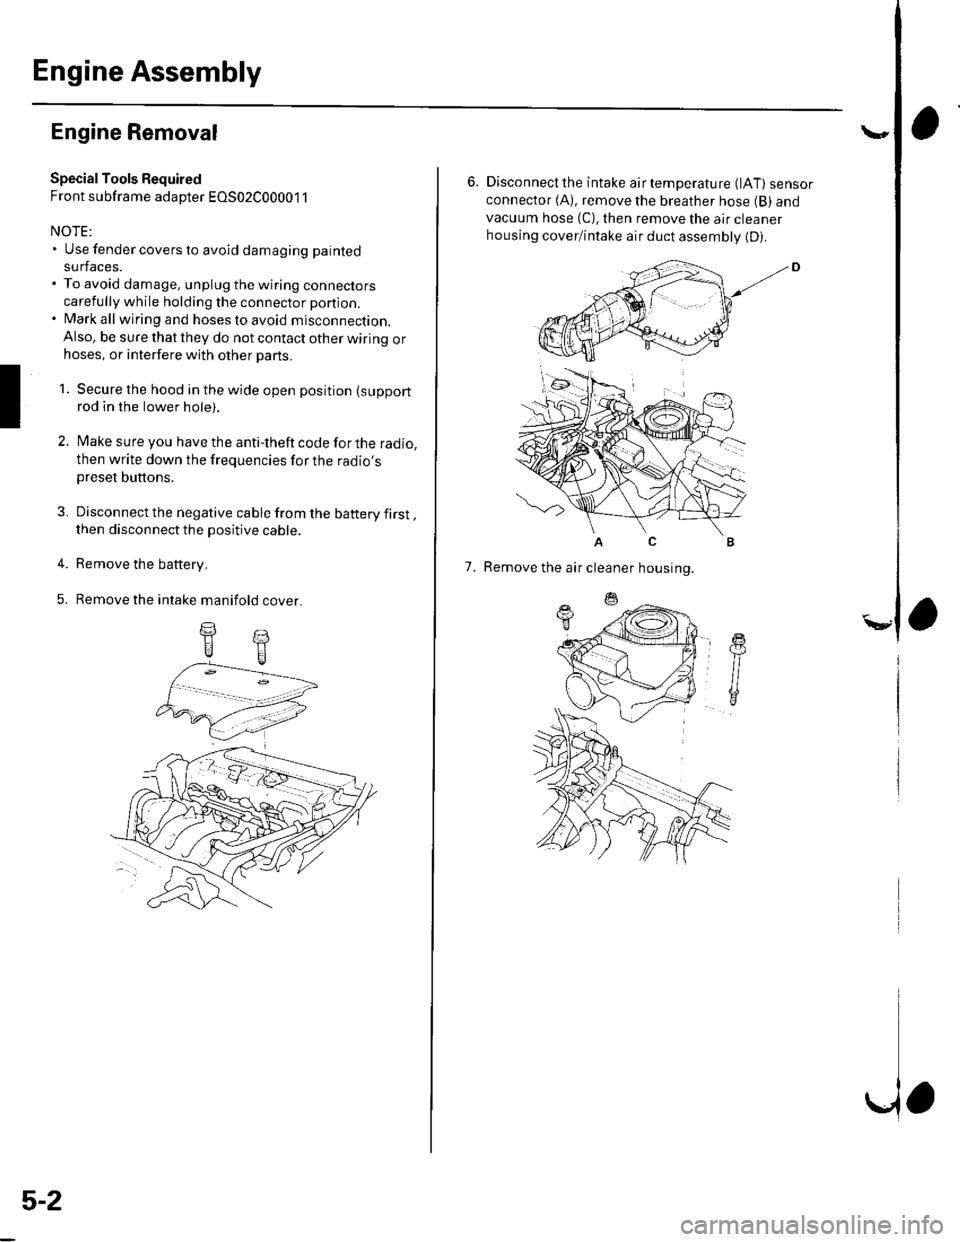 HONDA CIVIC 2002 7.G Workshop Manual Engine Assembly
I
Engine Removal
Special Tools Required
Front subframe adapter EOS02C00001 1
NOTE:. Use fender covers to avoid damaging painted
surfaces.. To avoid damage, unplug the wiring connectors